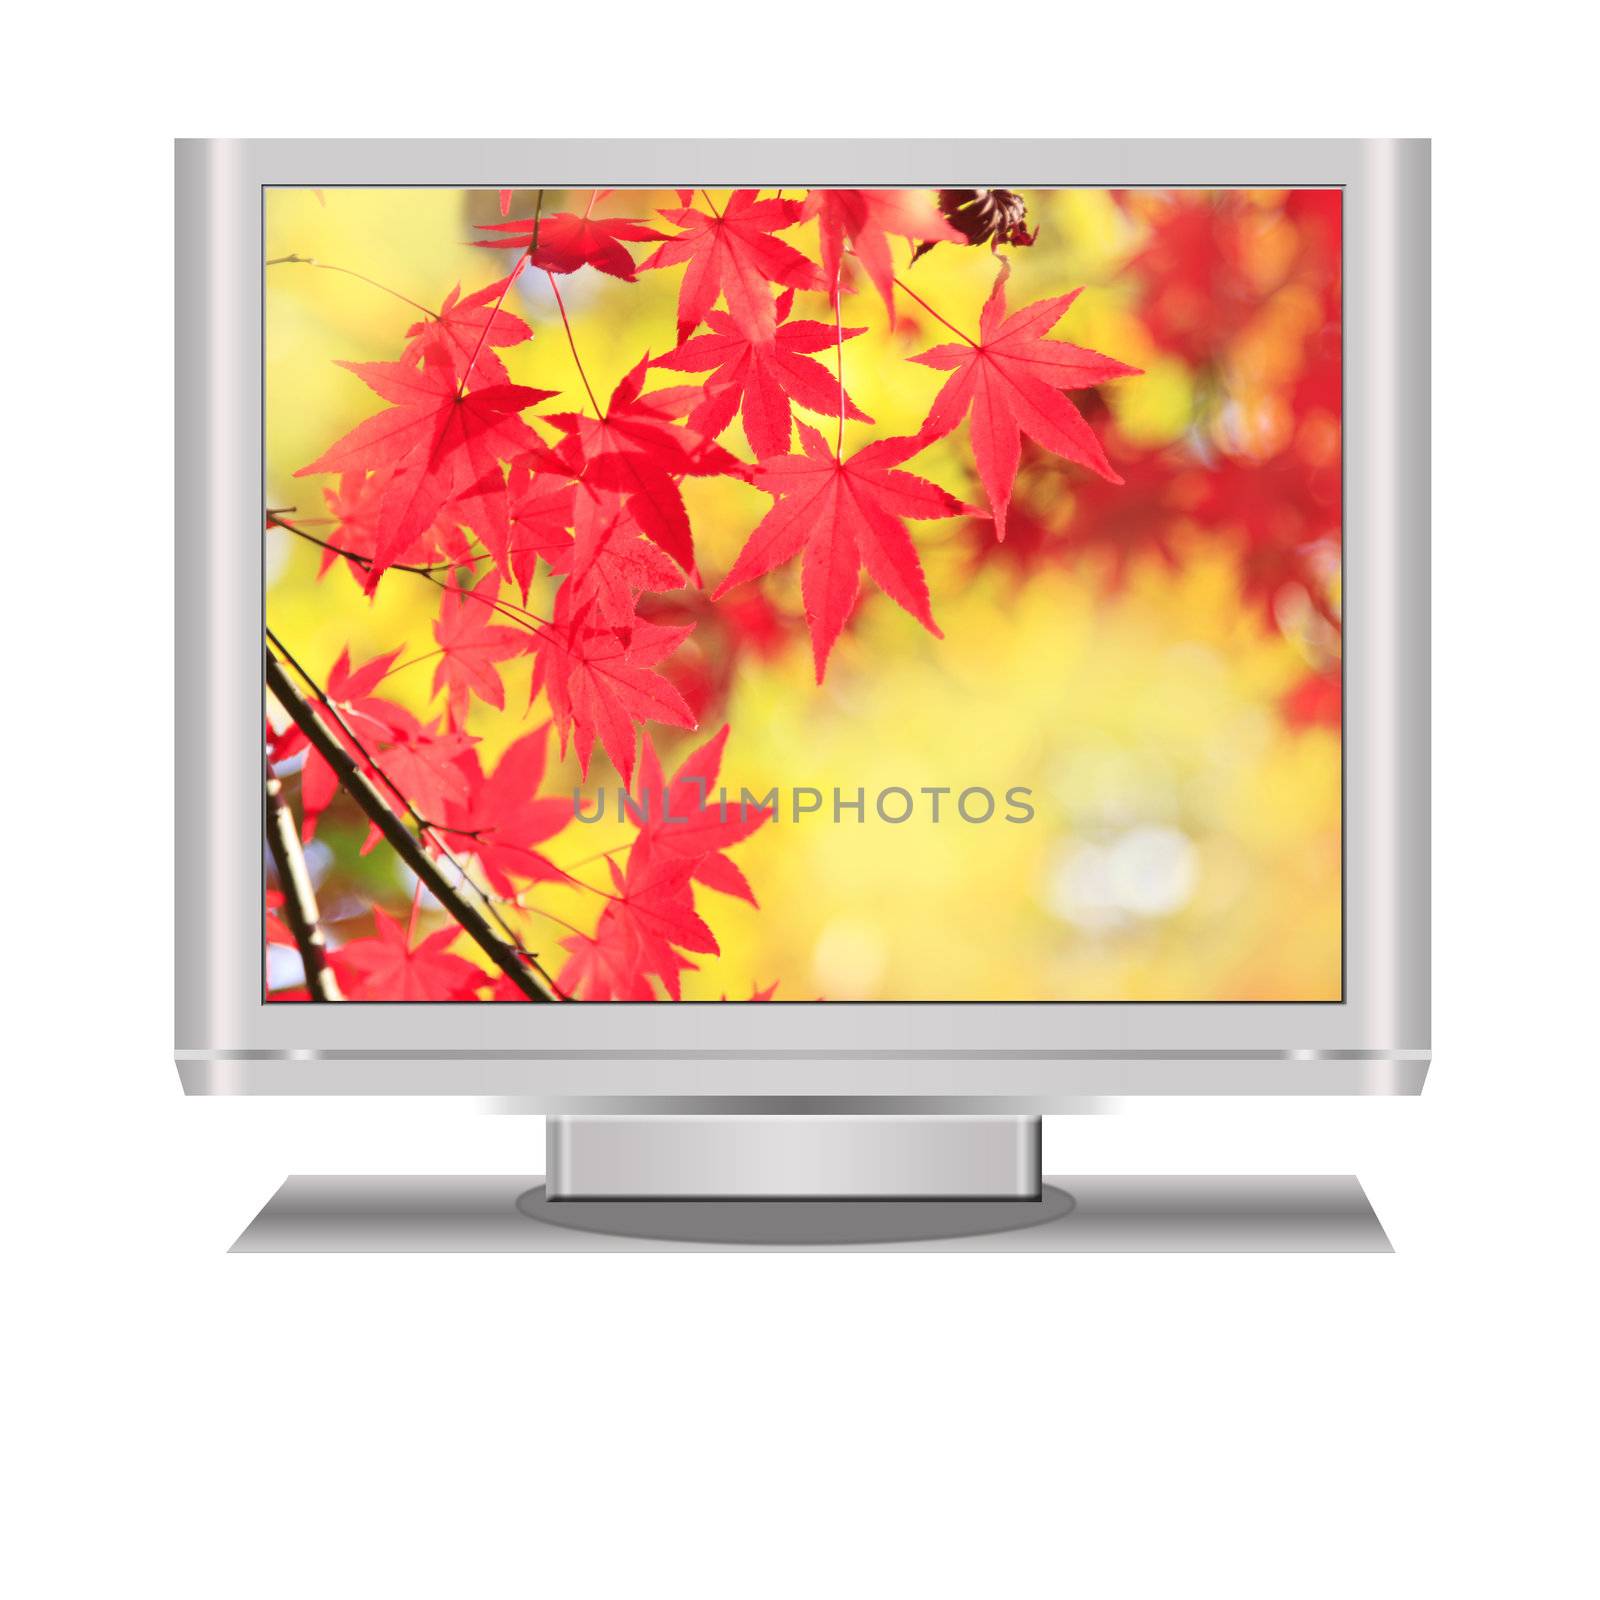 Lcd Television with Fall display by sacatani